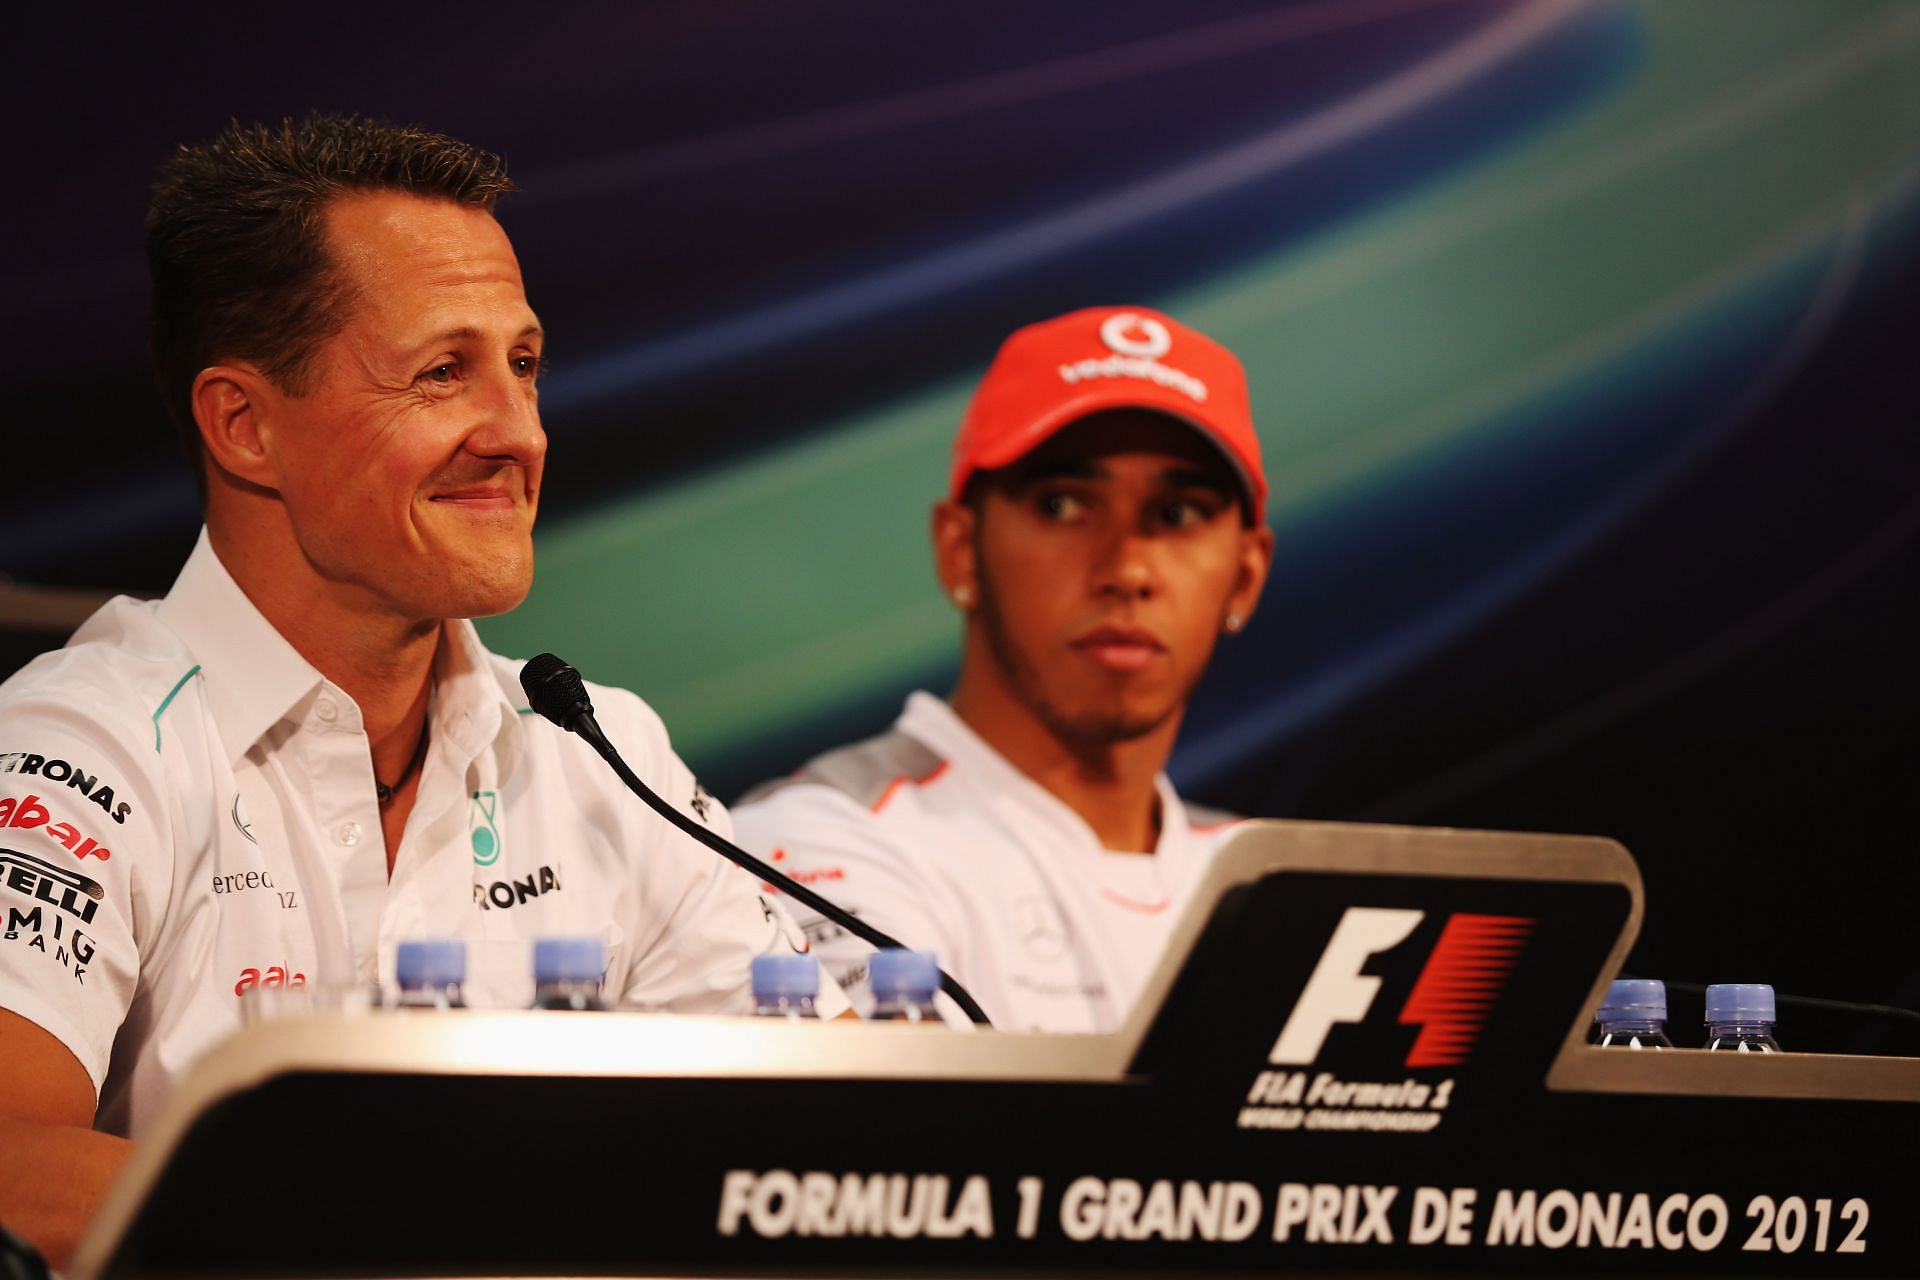 Michael Schumacher (foreground) and Lewis Hamilton (background) ahead of the 2012 Monaco GP (Photo by Clive Mason/Getty Images)